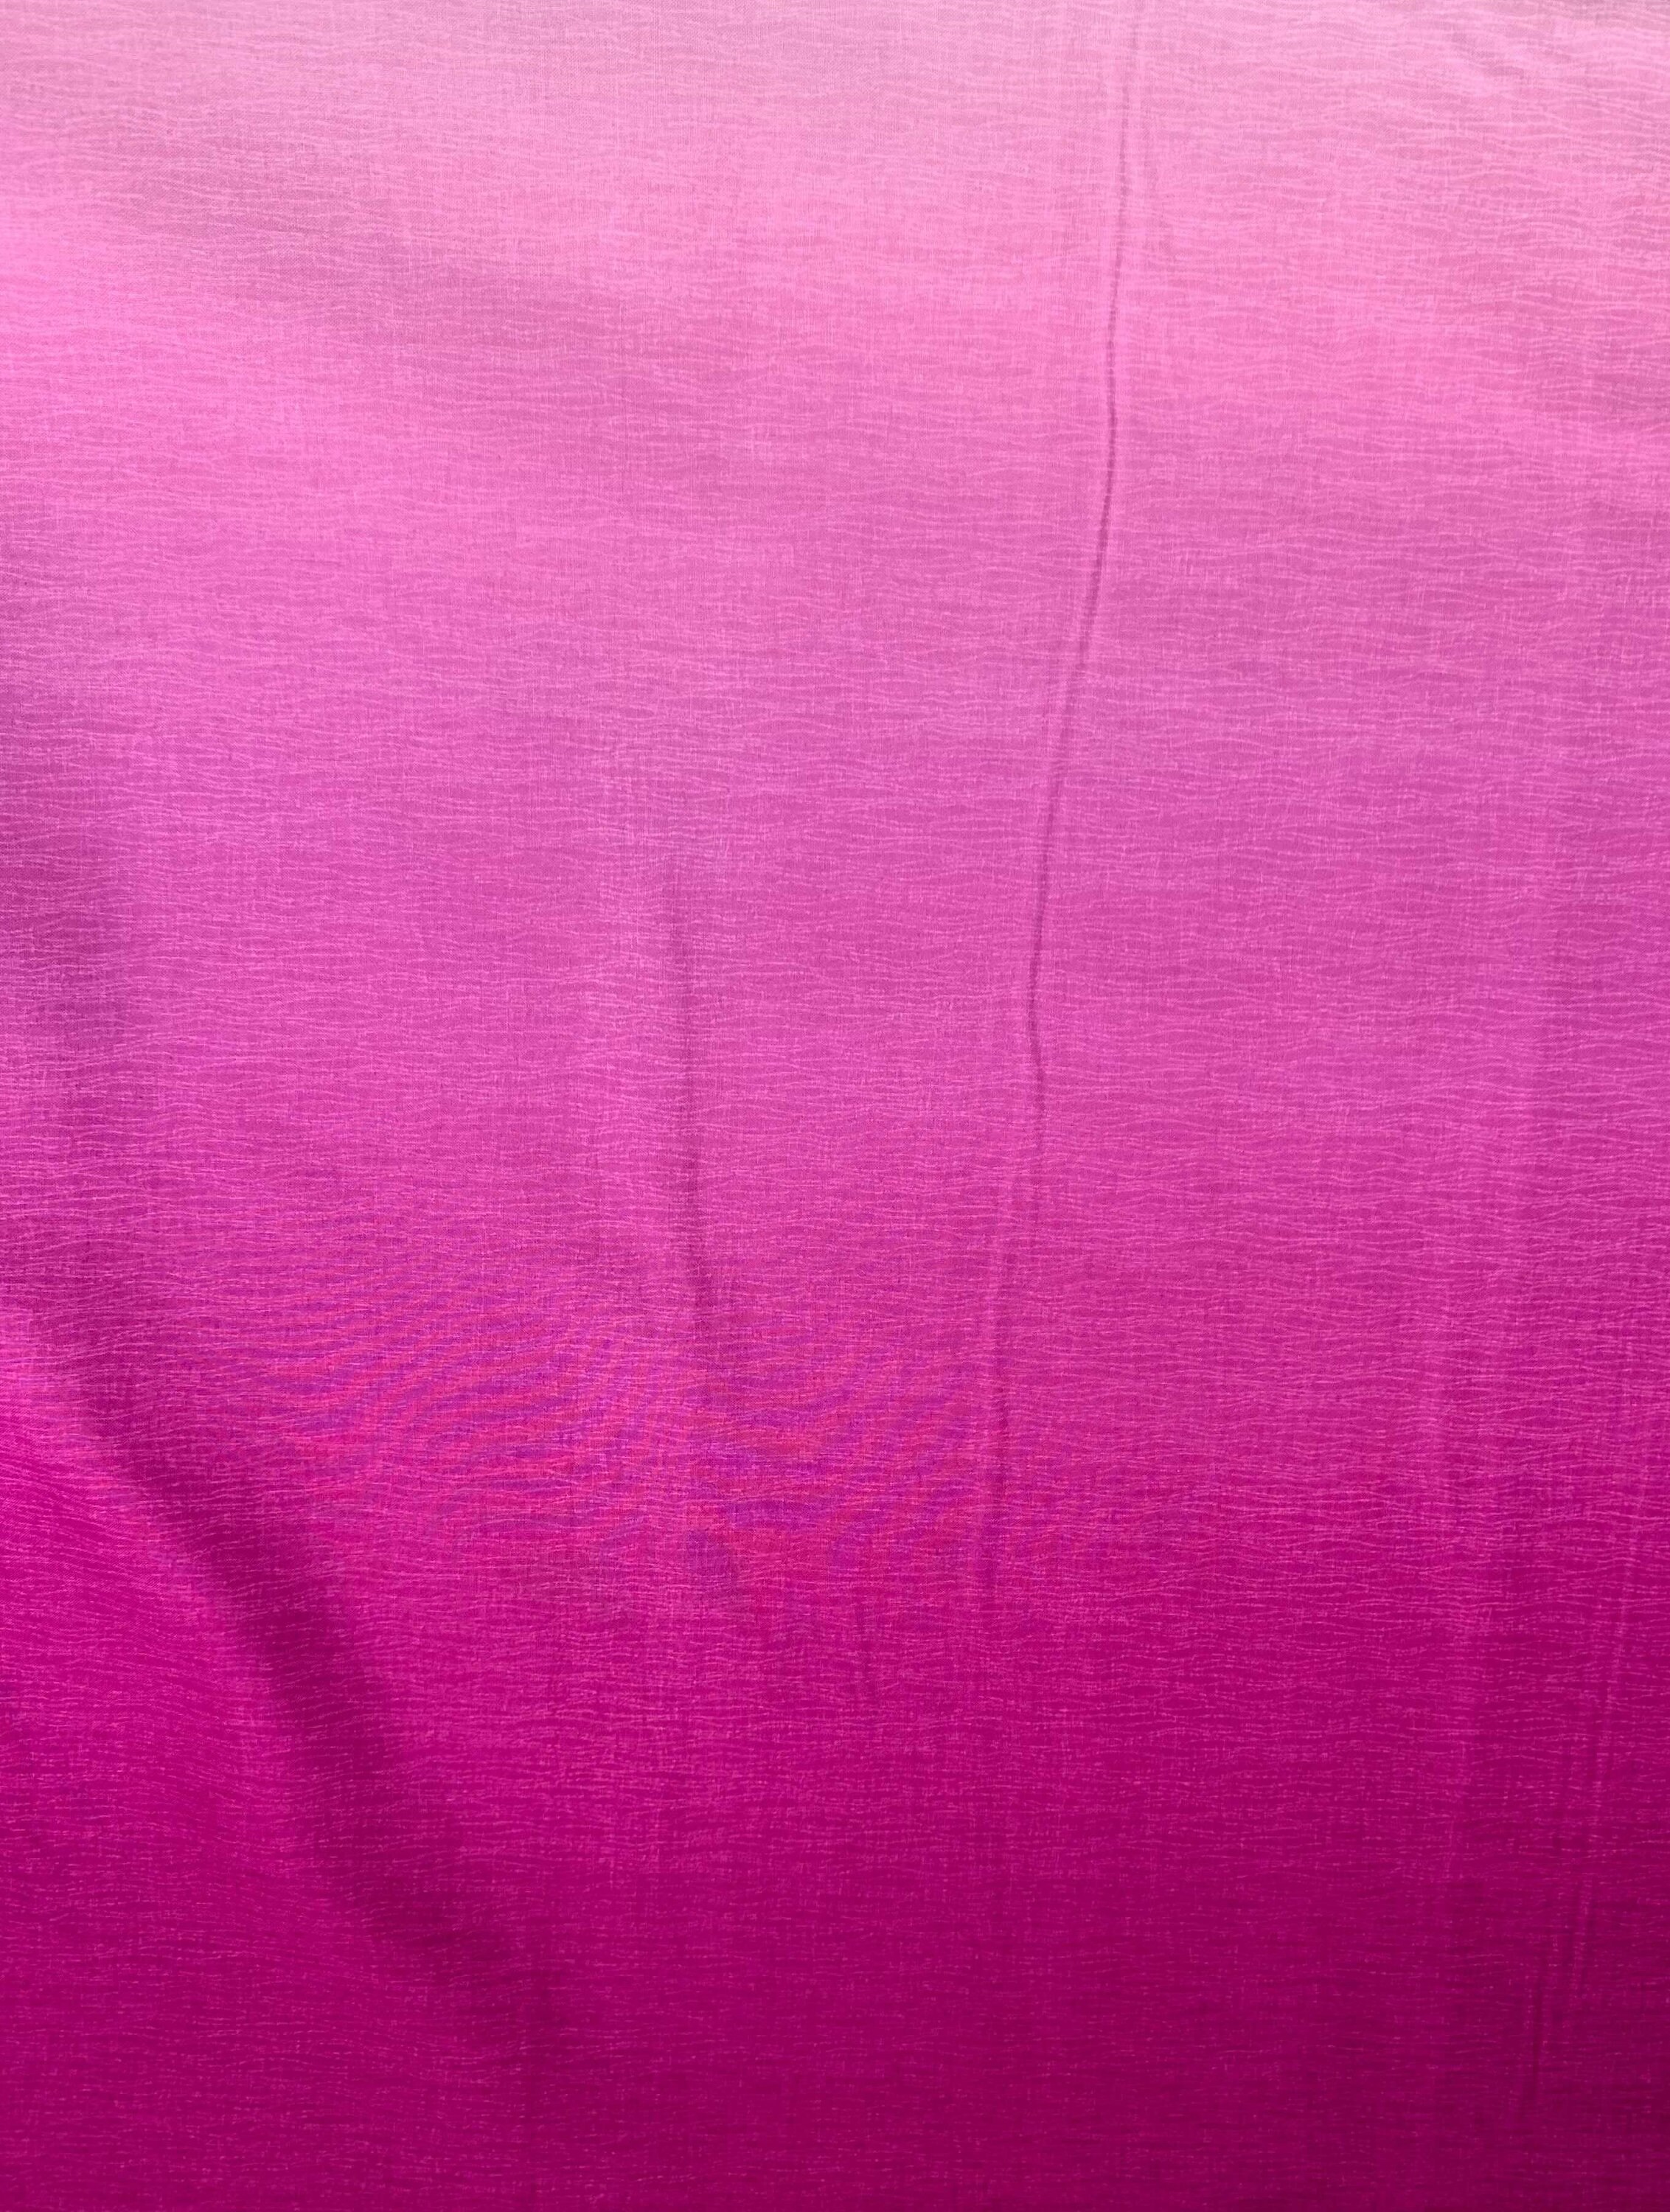 Ombre Pink and Purple Fabric